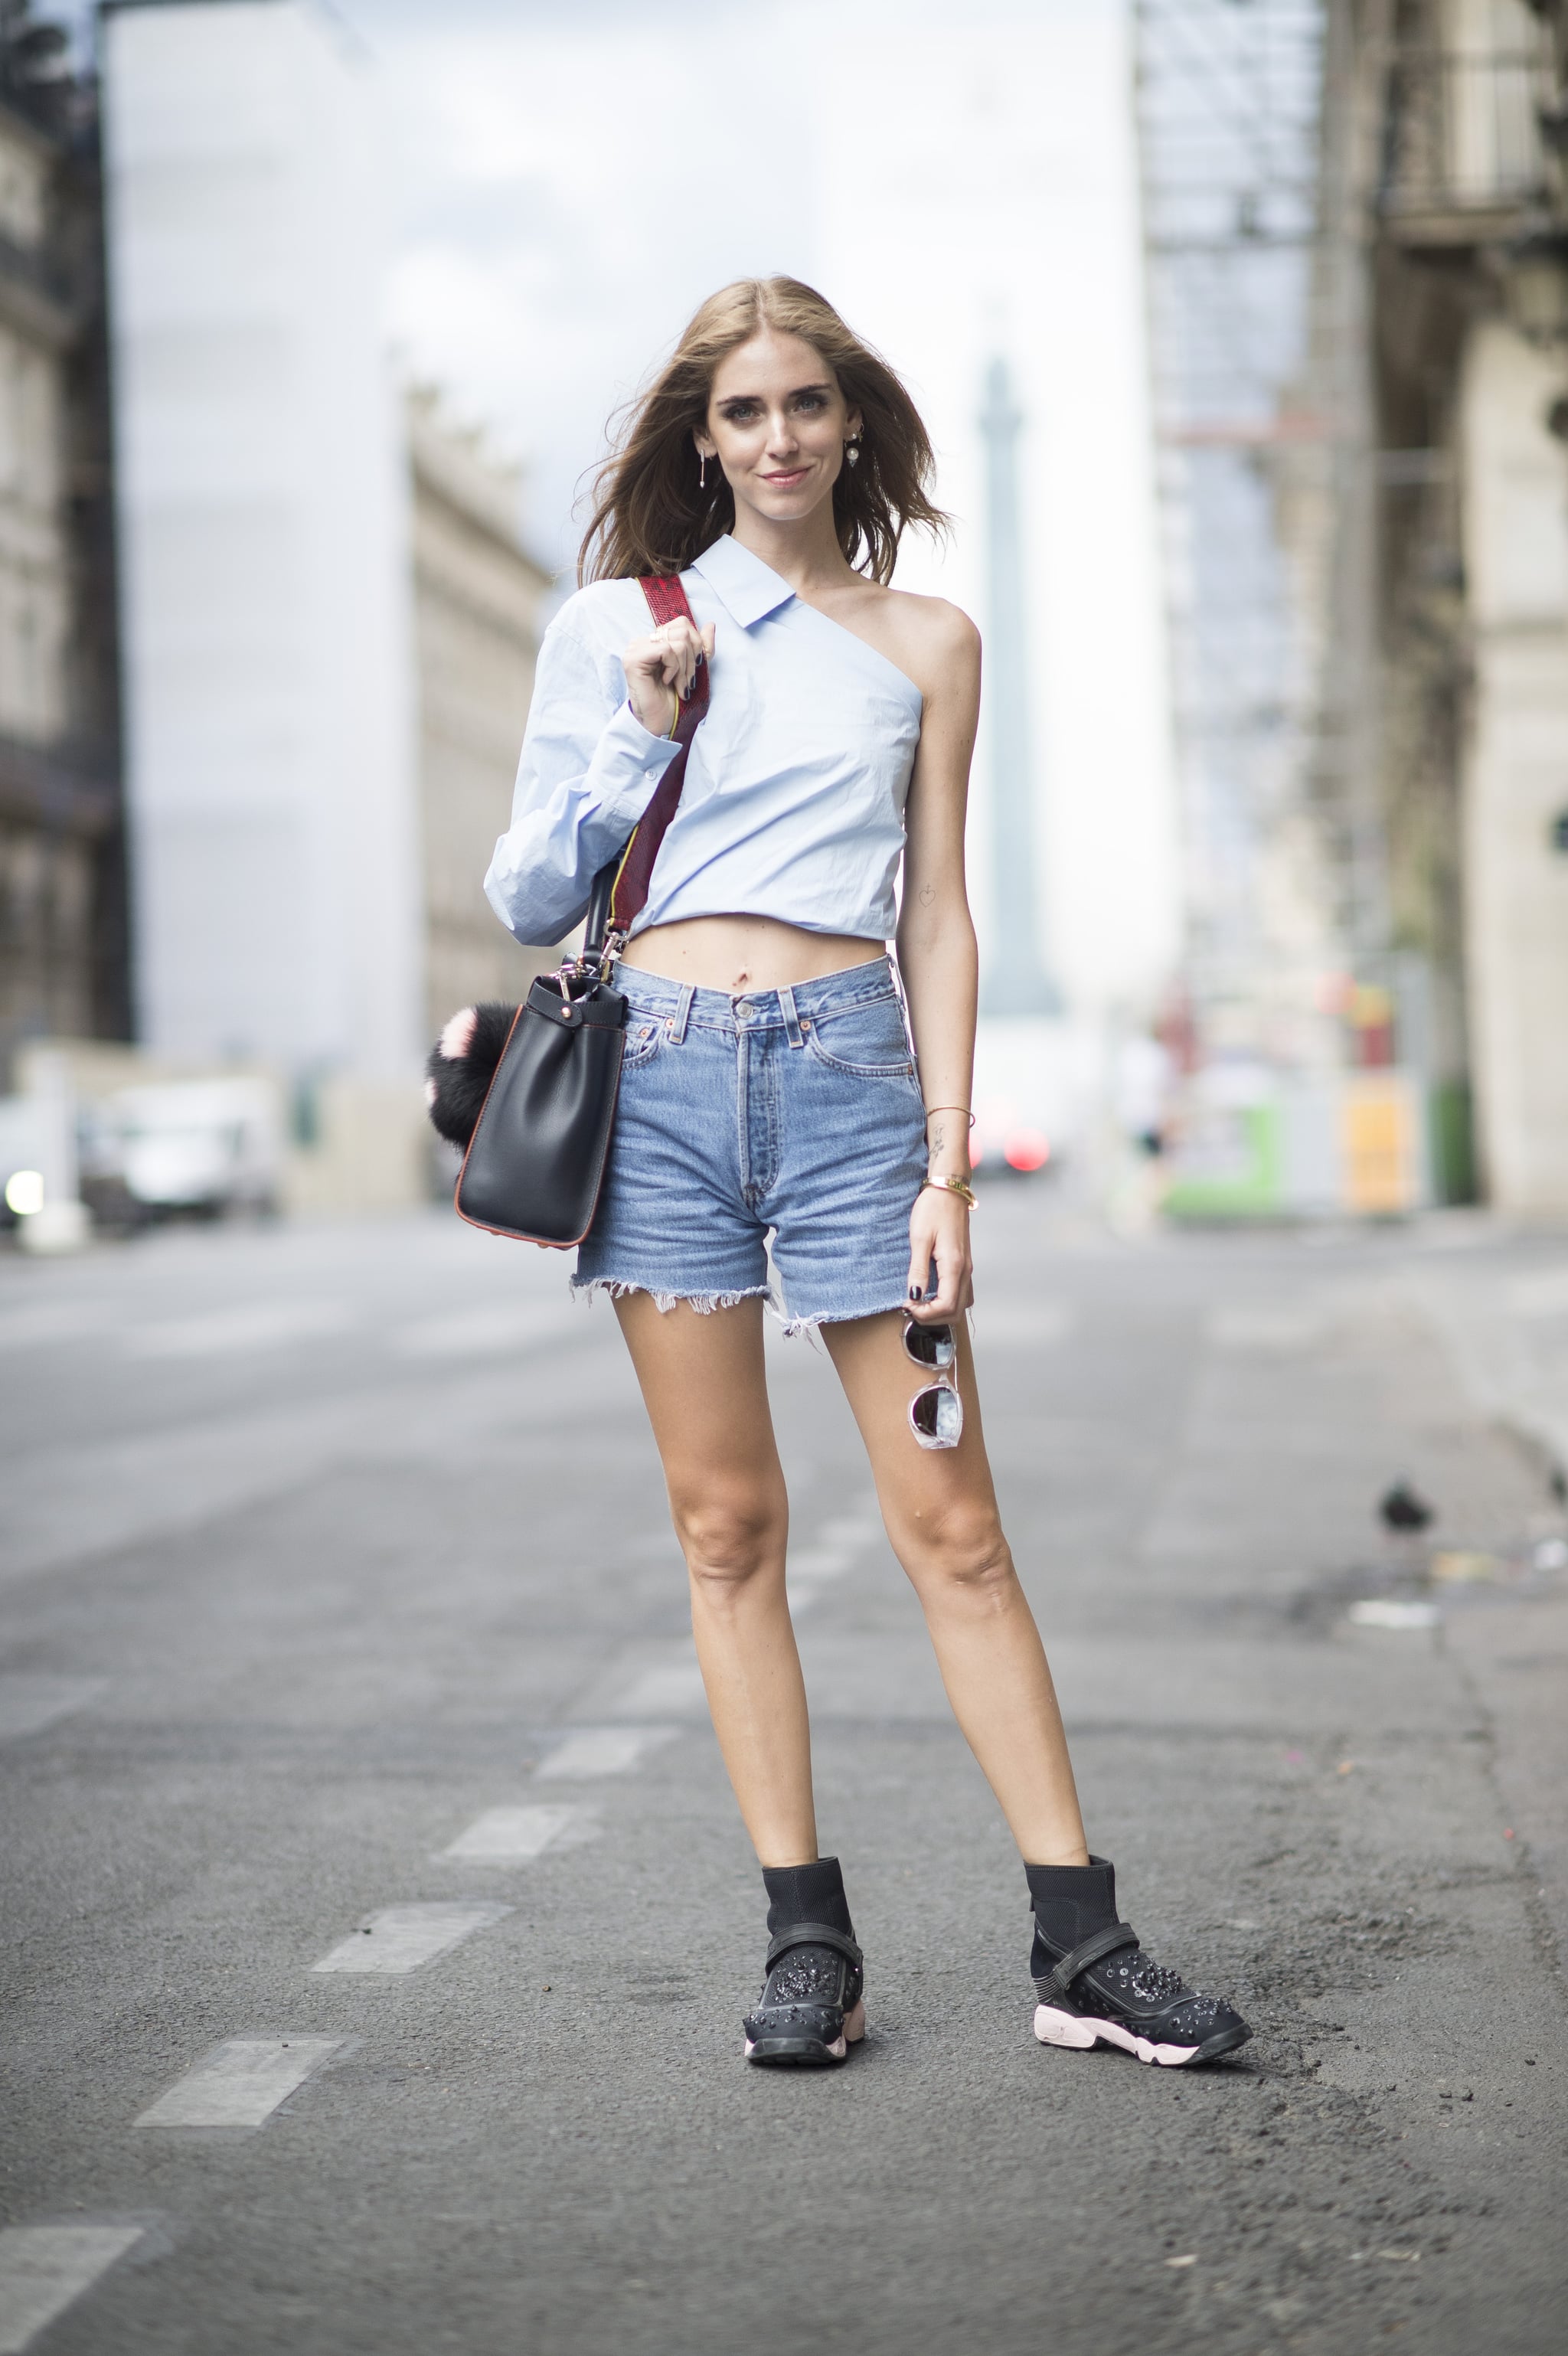 Style a One-Shouldered Top With High-Waisted Shorts